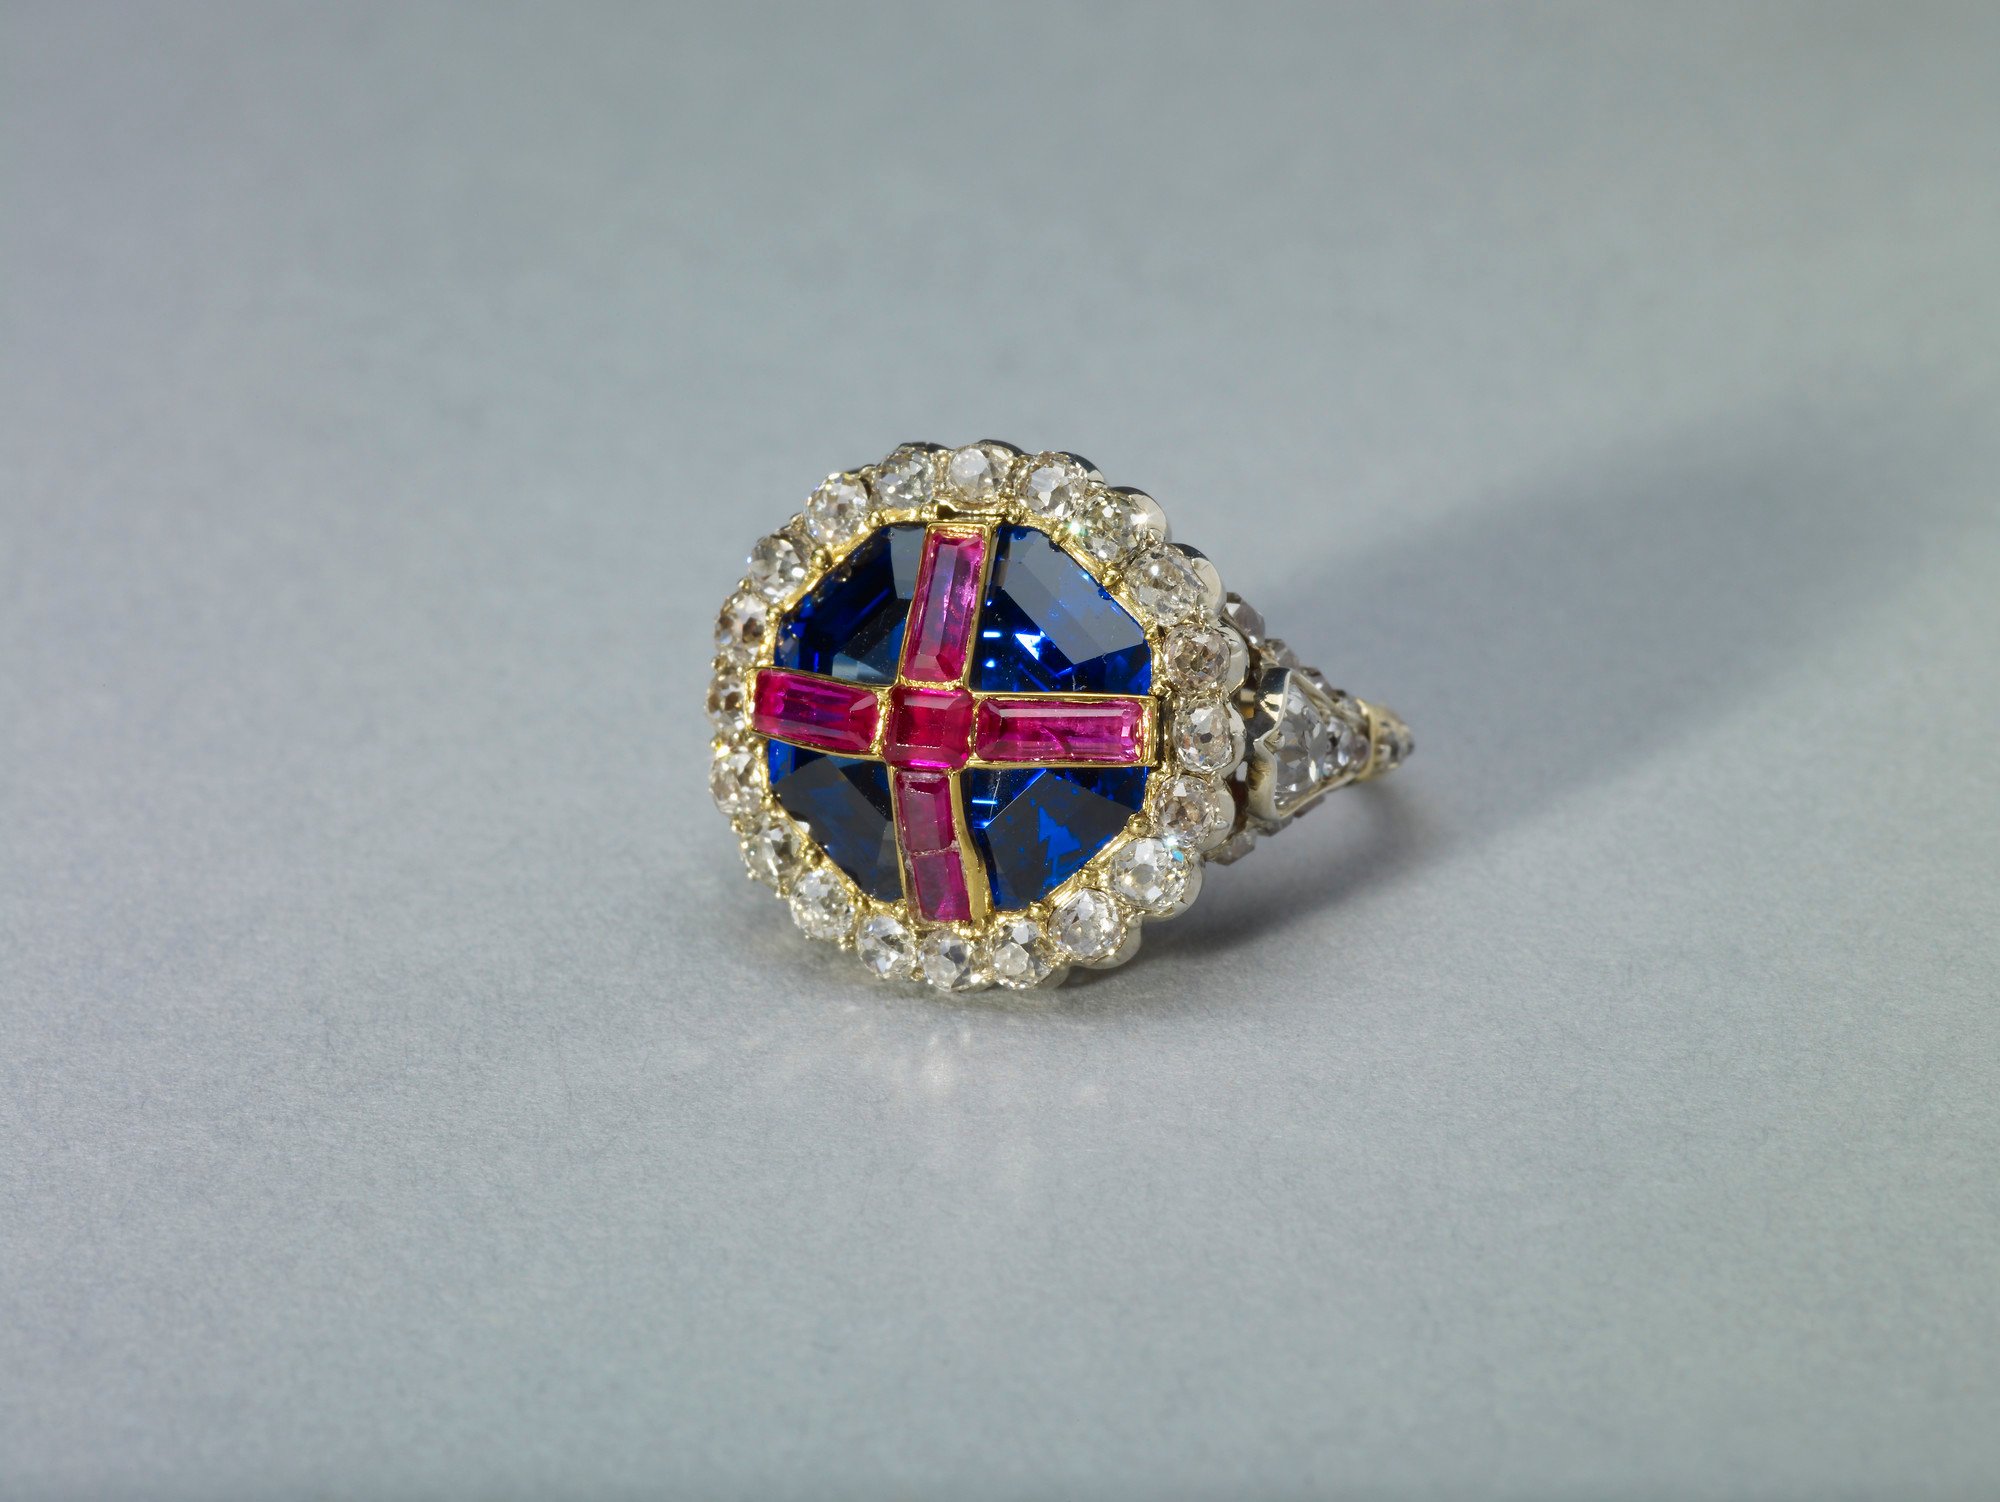 The ring comprises an octagonal step-cut sapphire, open-set in gold, overlaid with four oblong and one square rubies in gold strips forming a cross, within a border of twenty cushion-shaped brilliants in transparent silver collets. Brilliants decorate the